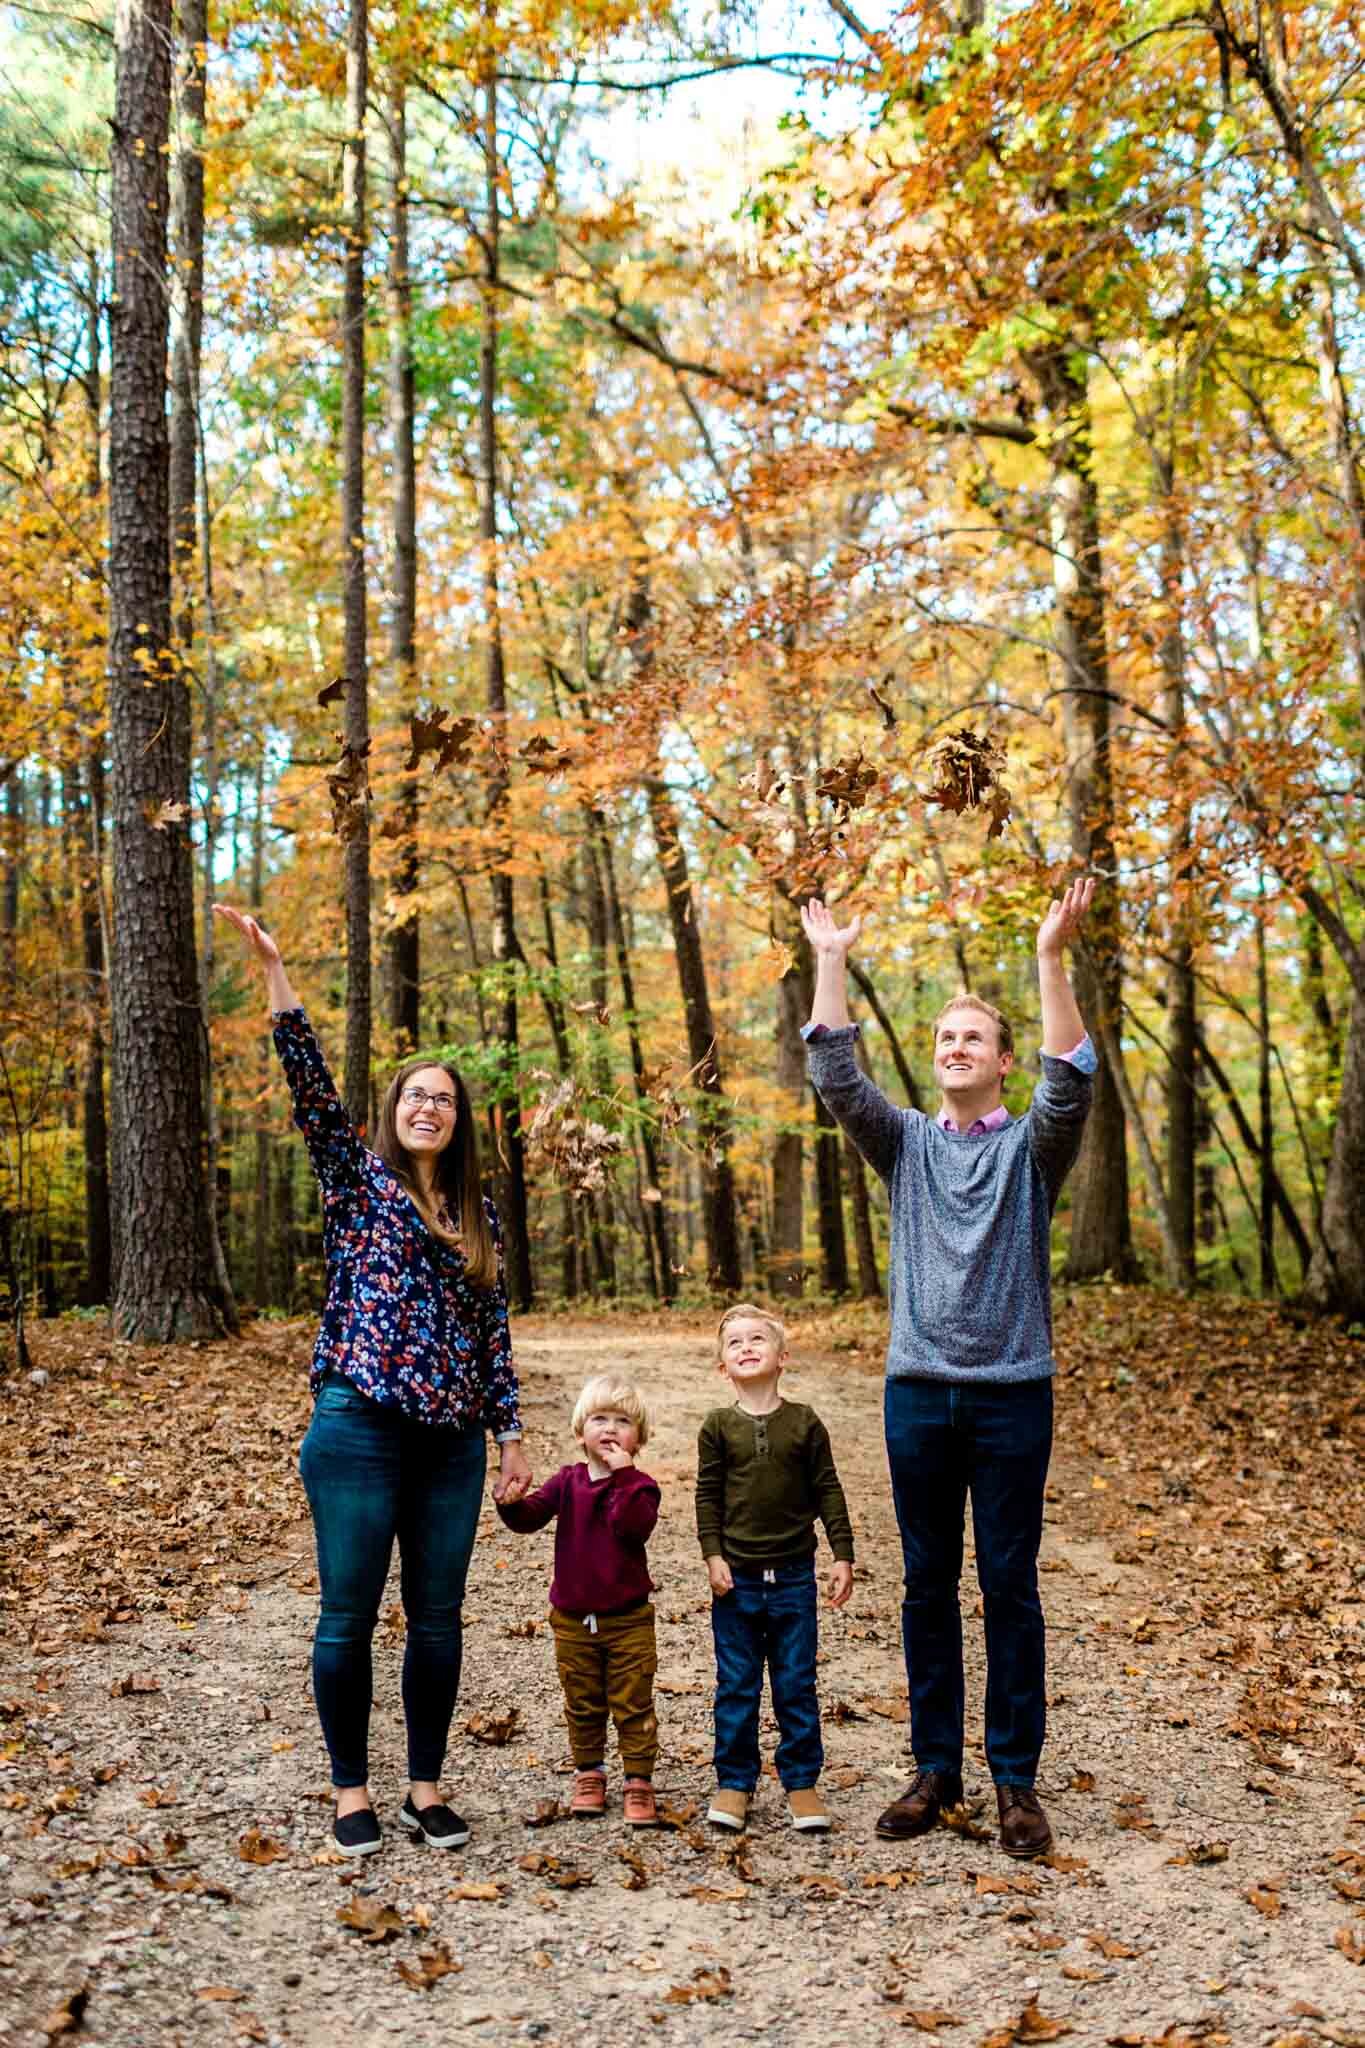 Raleigh Family Photographer at Umstead Park | By G. Lin Photography | Family tossing leaves in the air